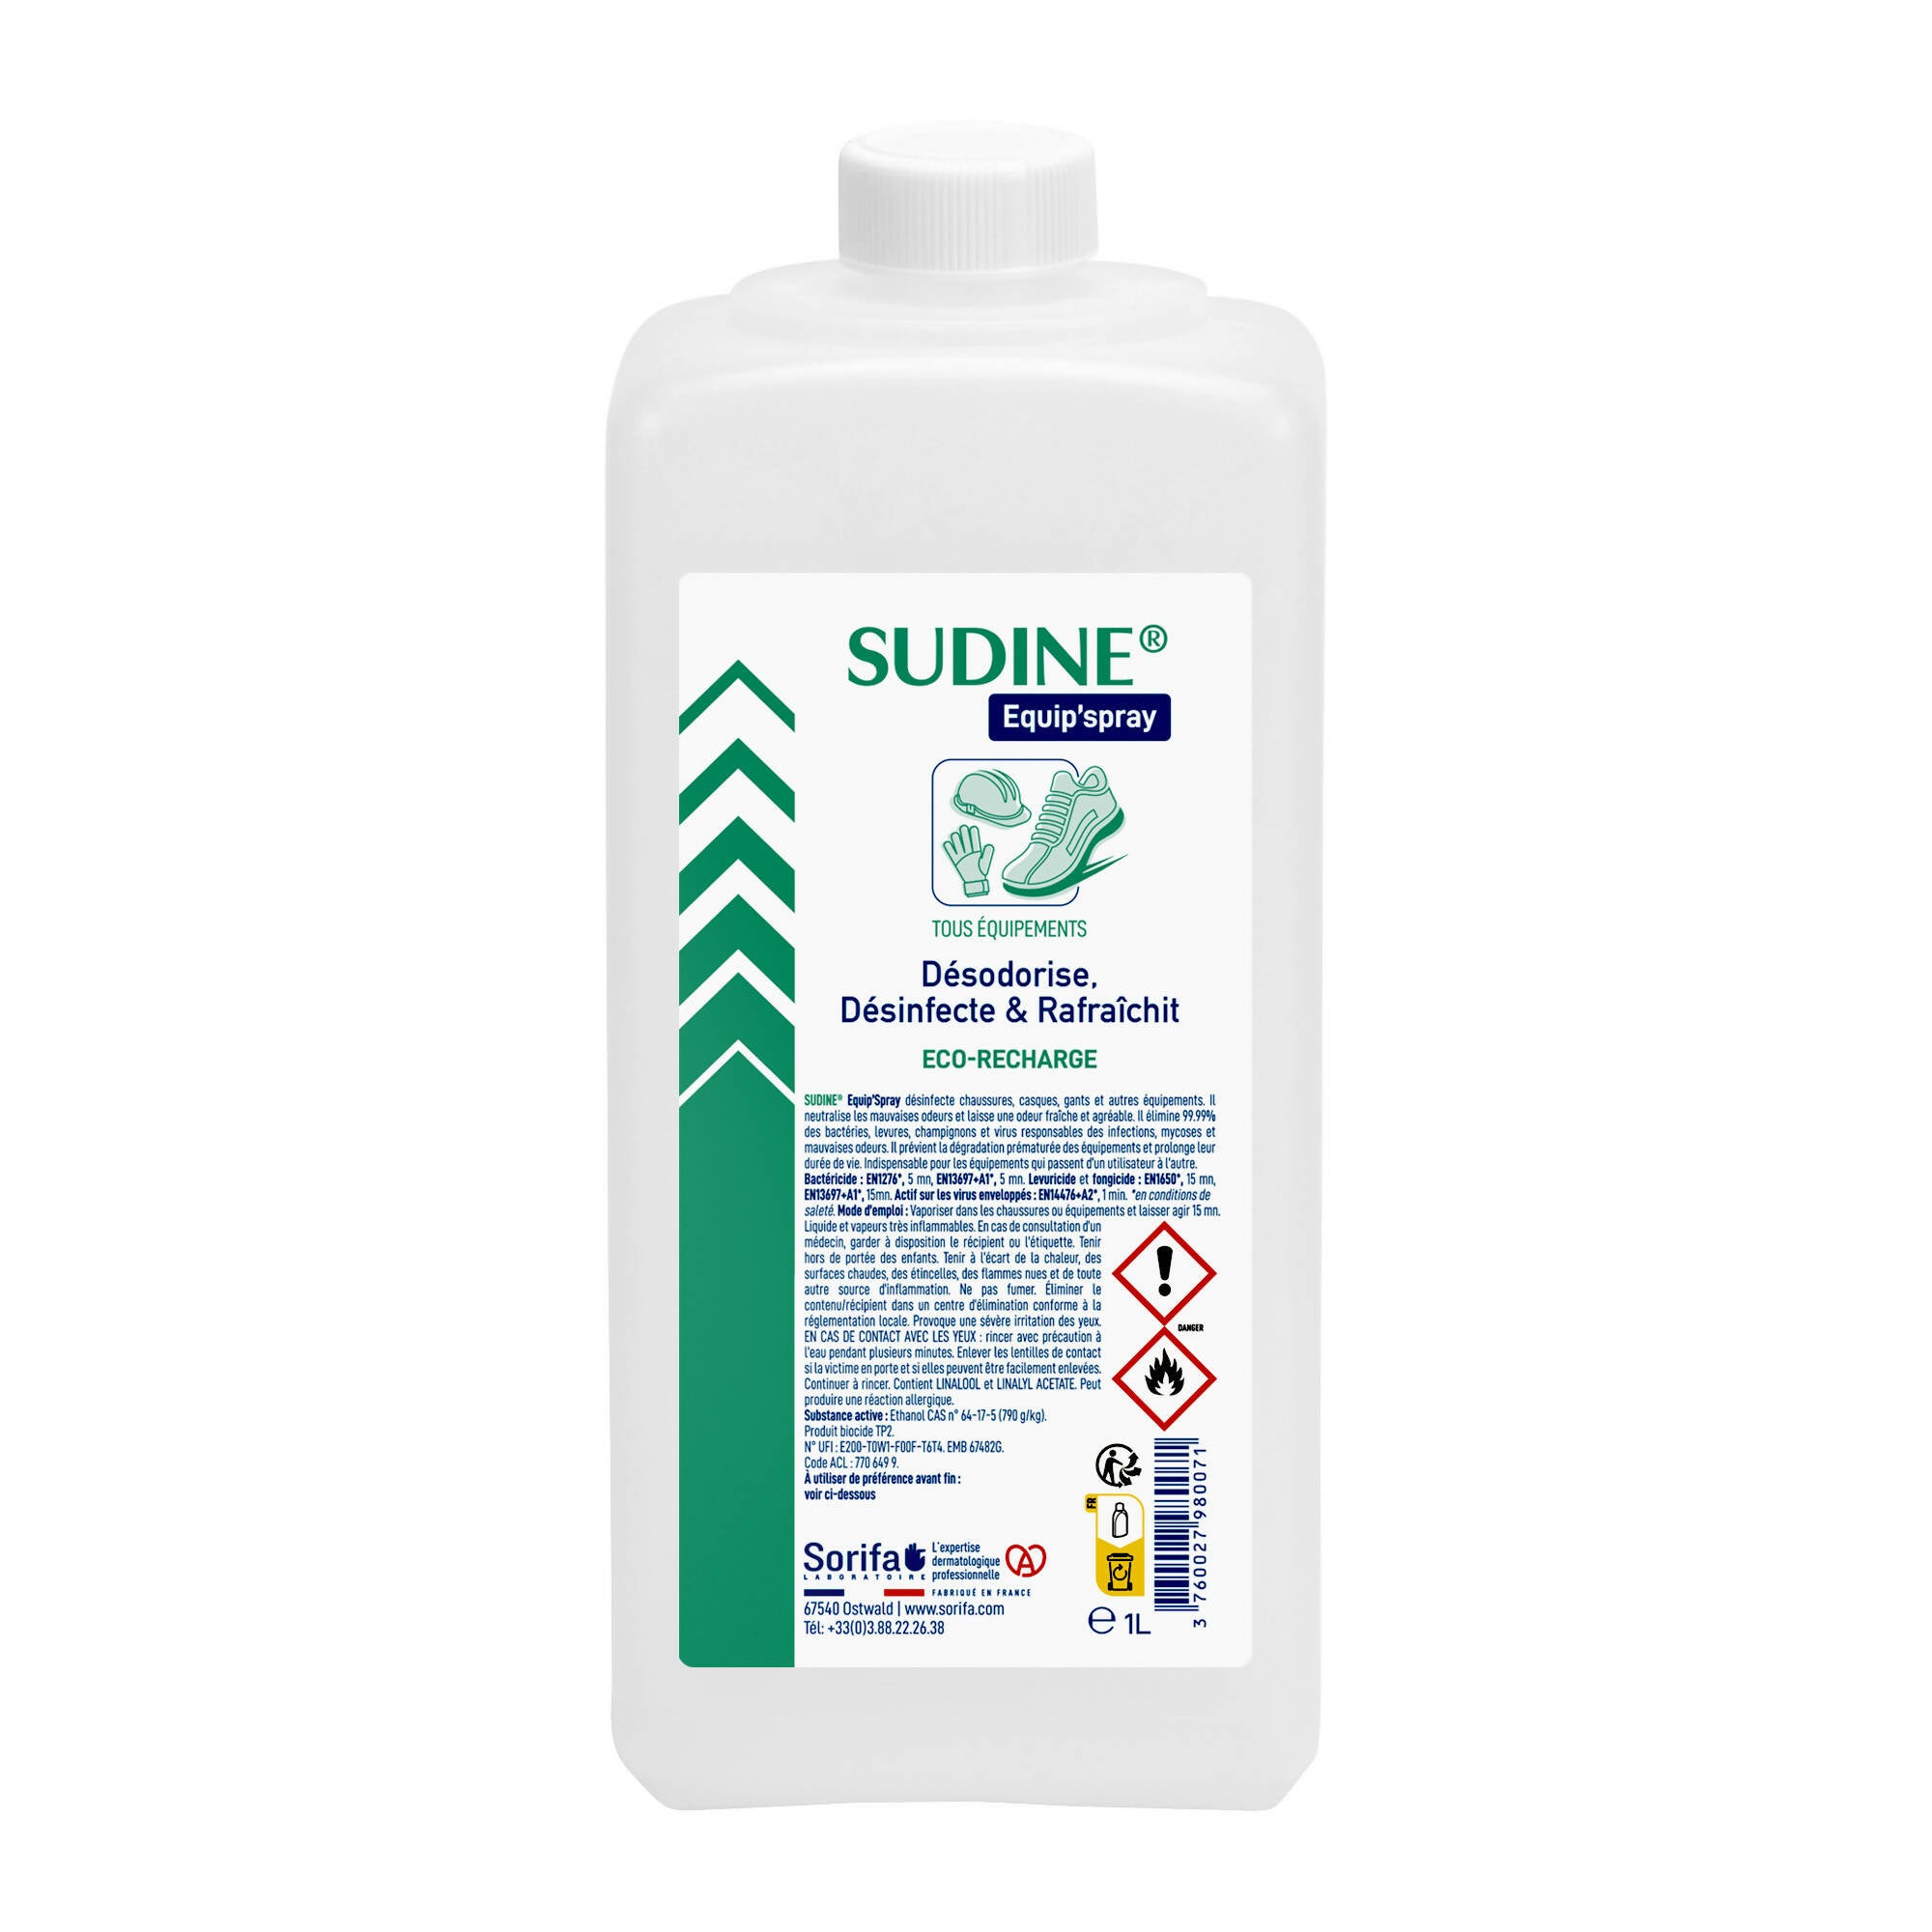 SORIFA - Sudine Equip'spray - Deodorizes, disinfects, refreshes - Shoes, helmets, gloves, equipment - 1L refill for SUDINE Equip'spray 50 and 125 ml or for the 1L SORIFA Spray